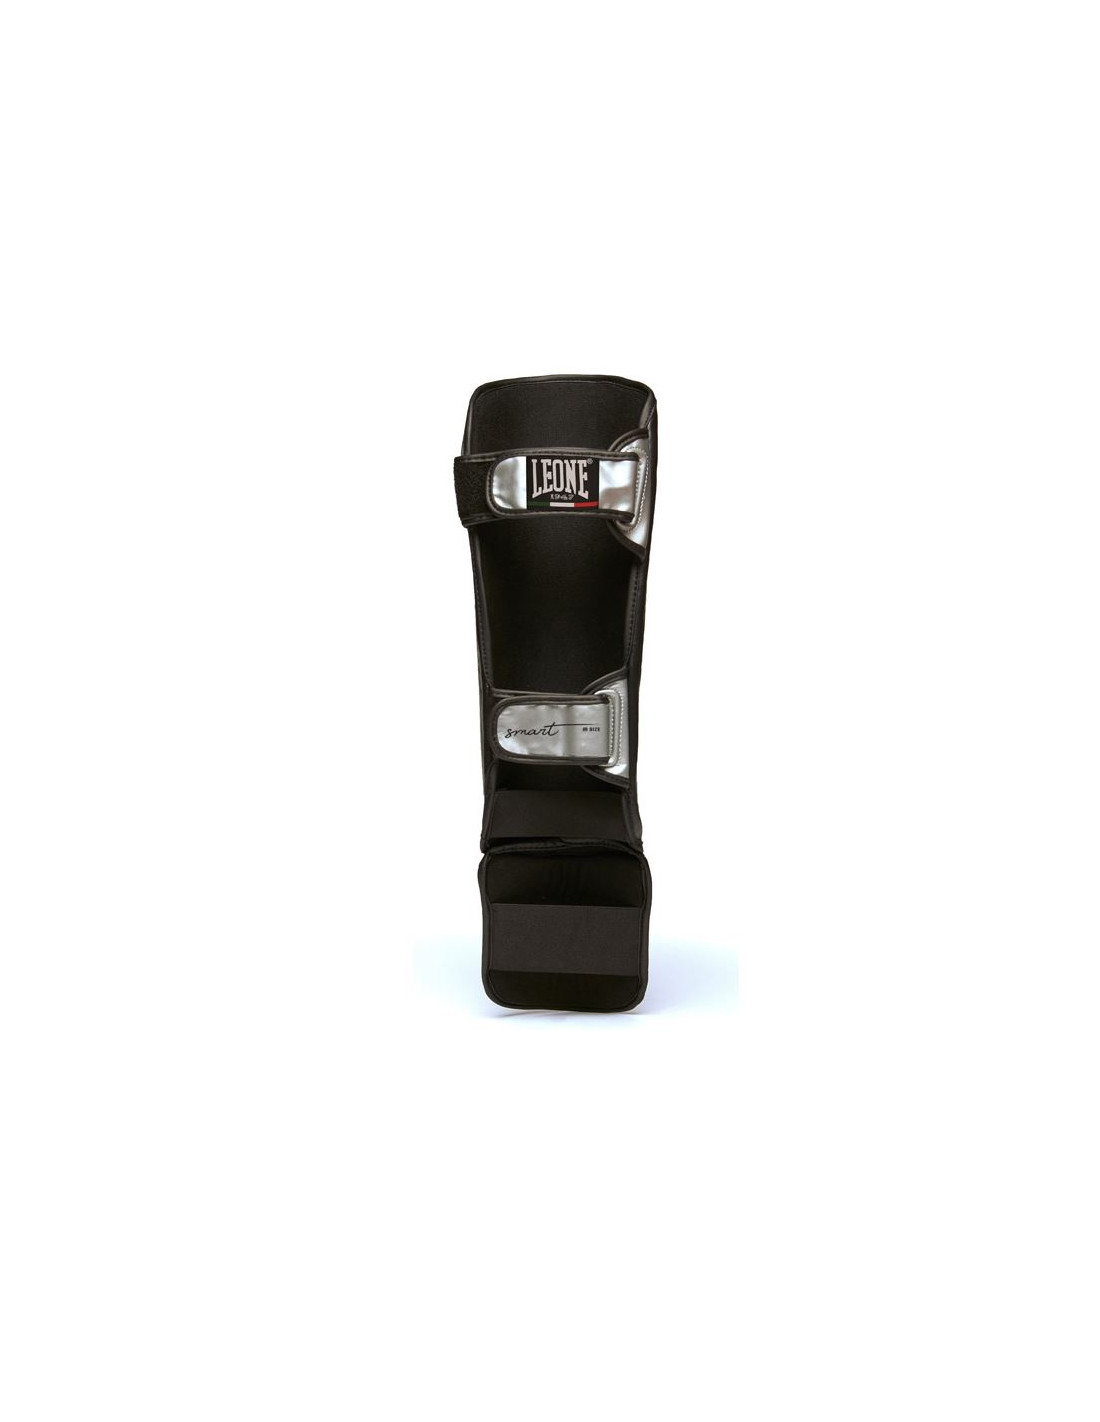 Protector Tibial Leone Smart PT135